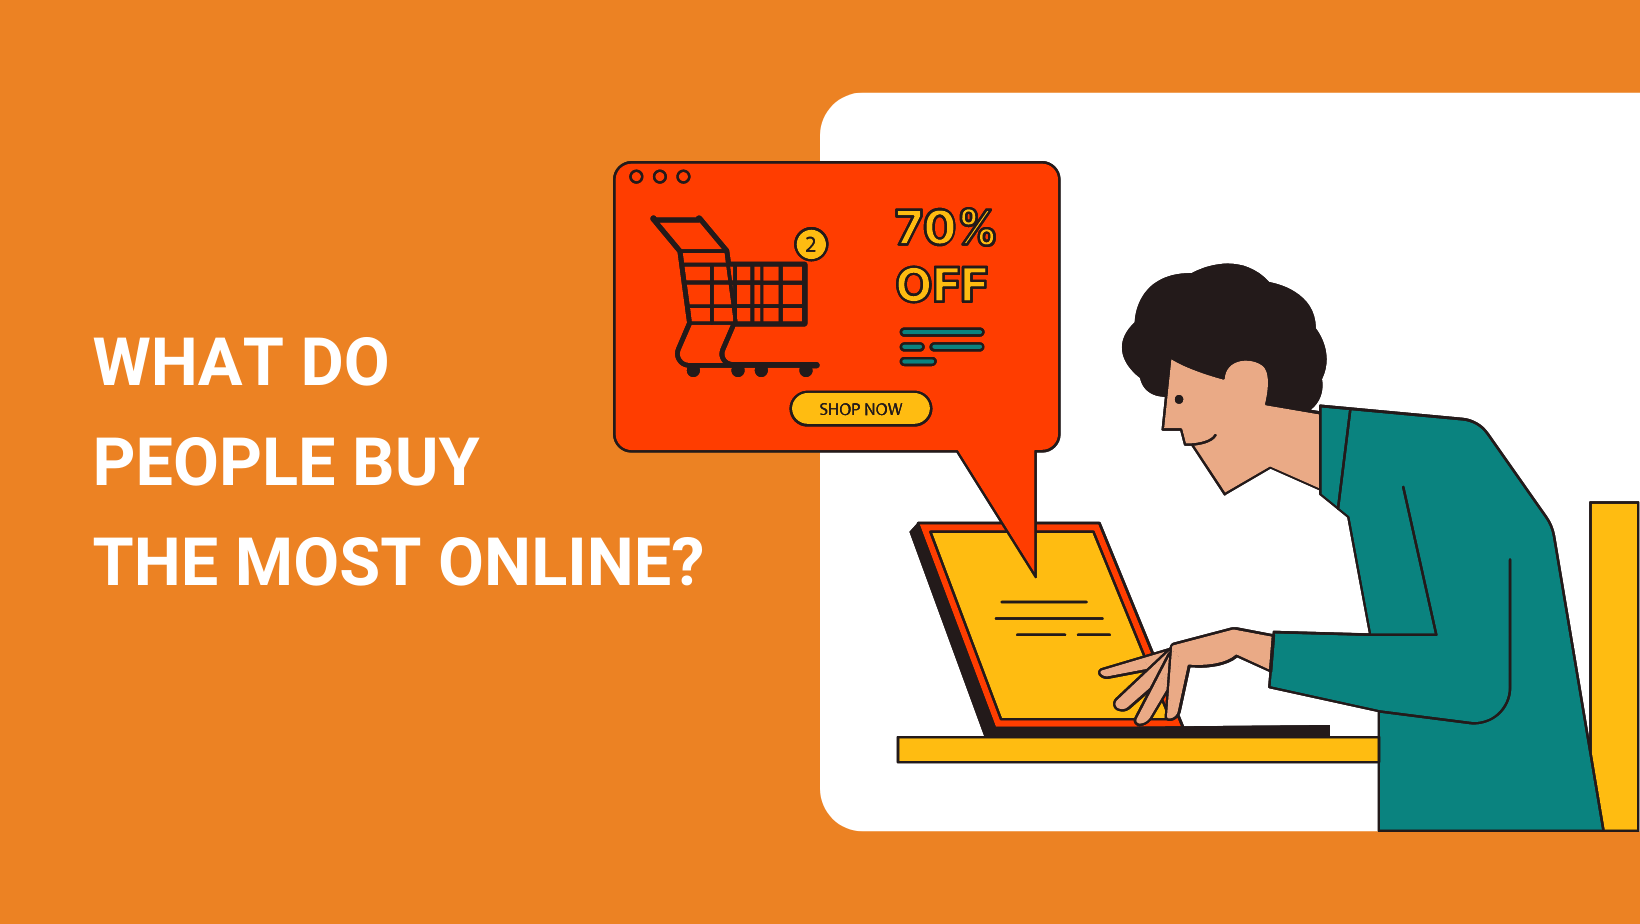 WHAT DO PEOPLE BUY THE MOST ONLINE